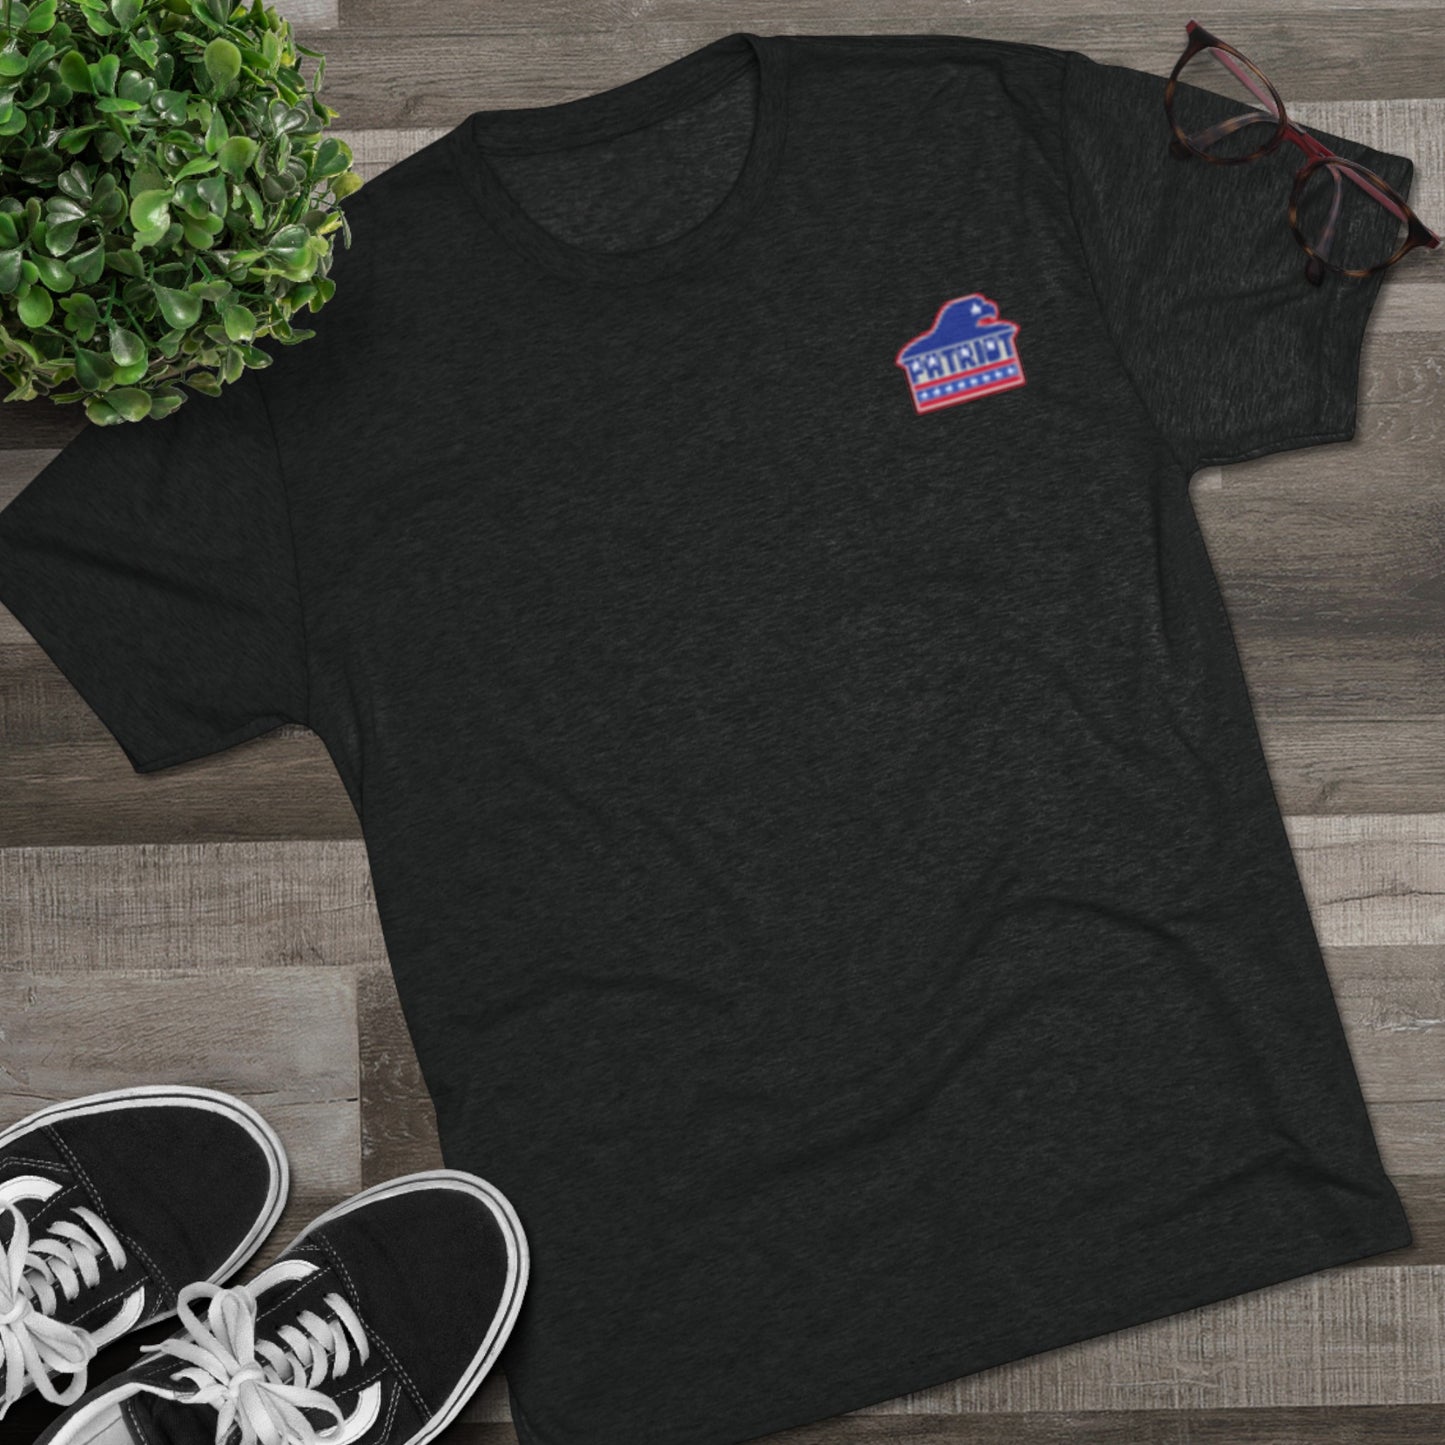 Get trendy with "We the People" Unisex Tri-Blend Crew Tee - T-Shirt available at Good Gift Company. Grab yours for $26.83 today!